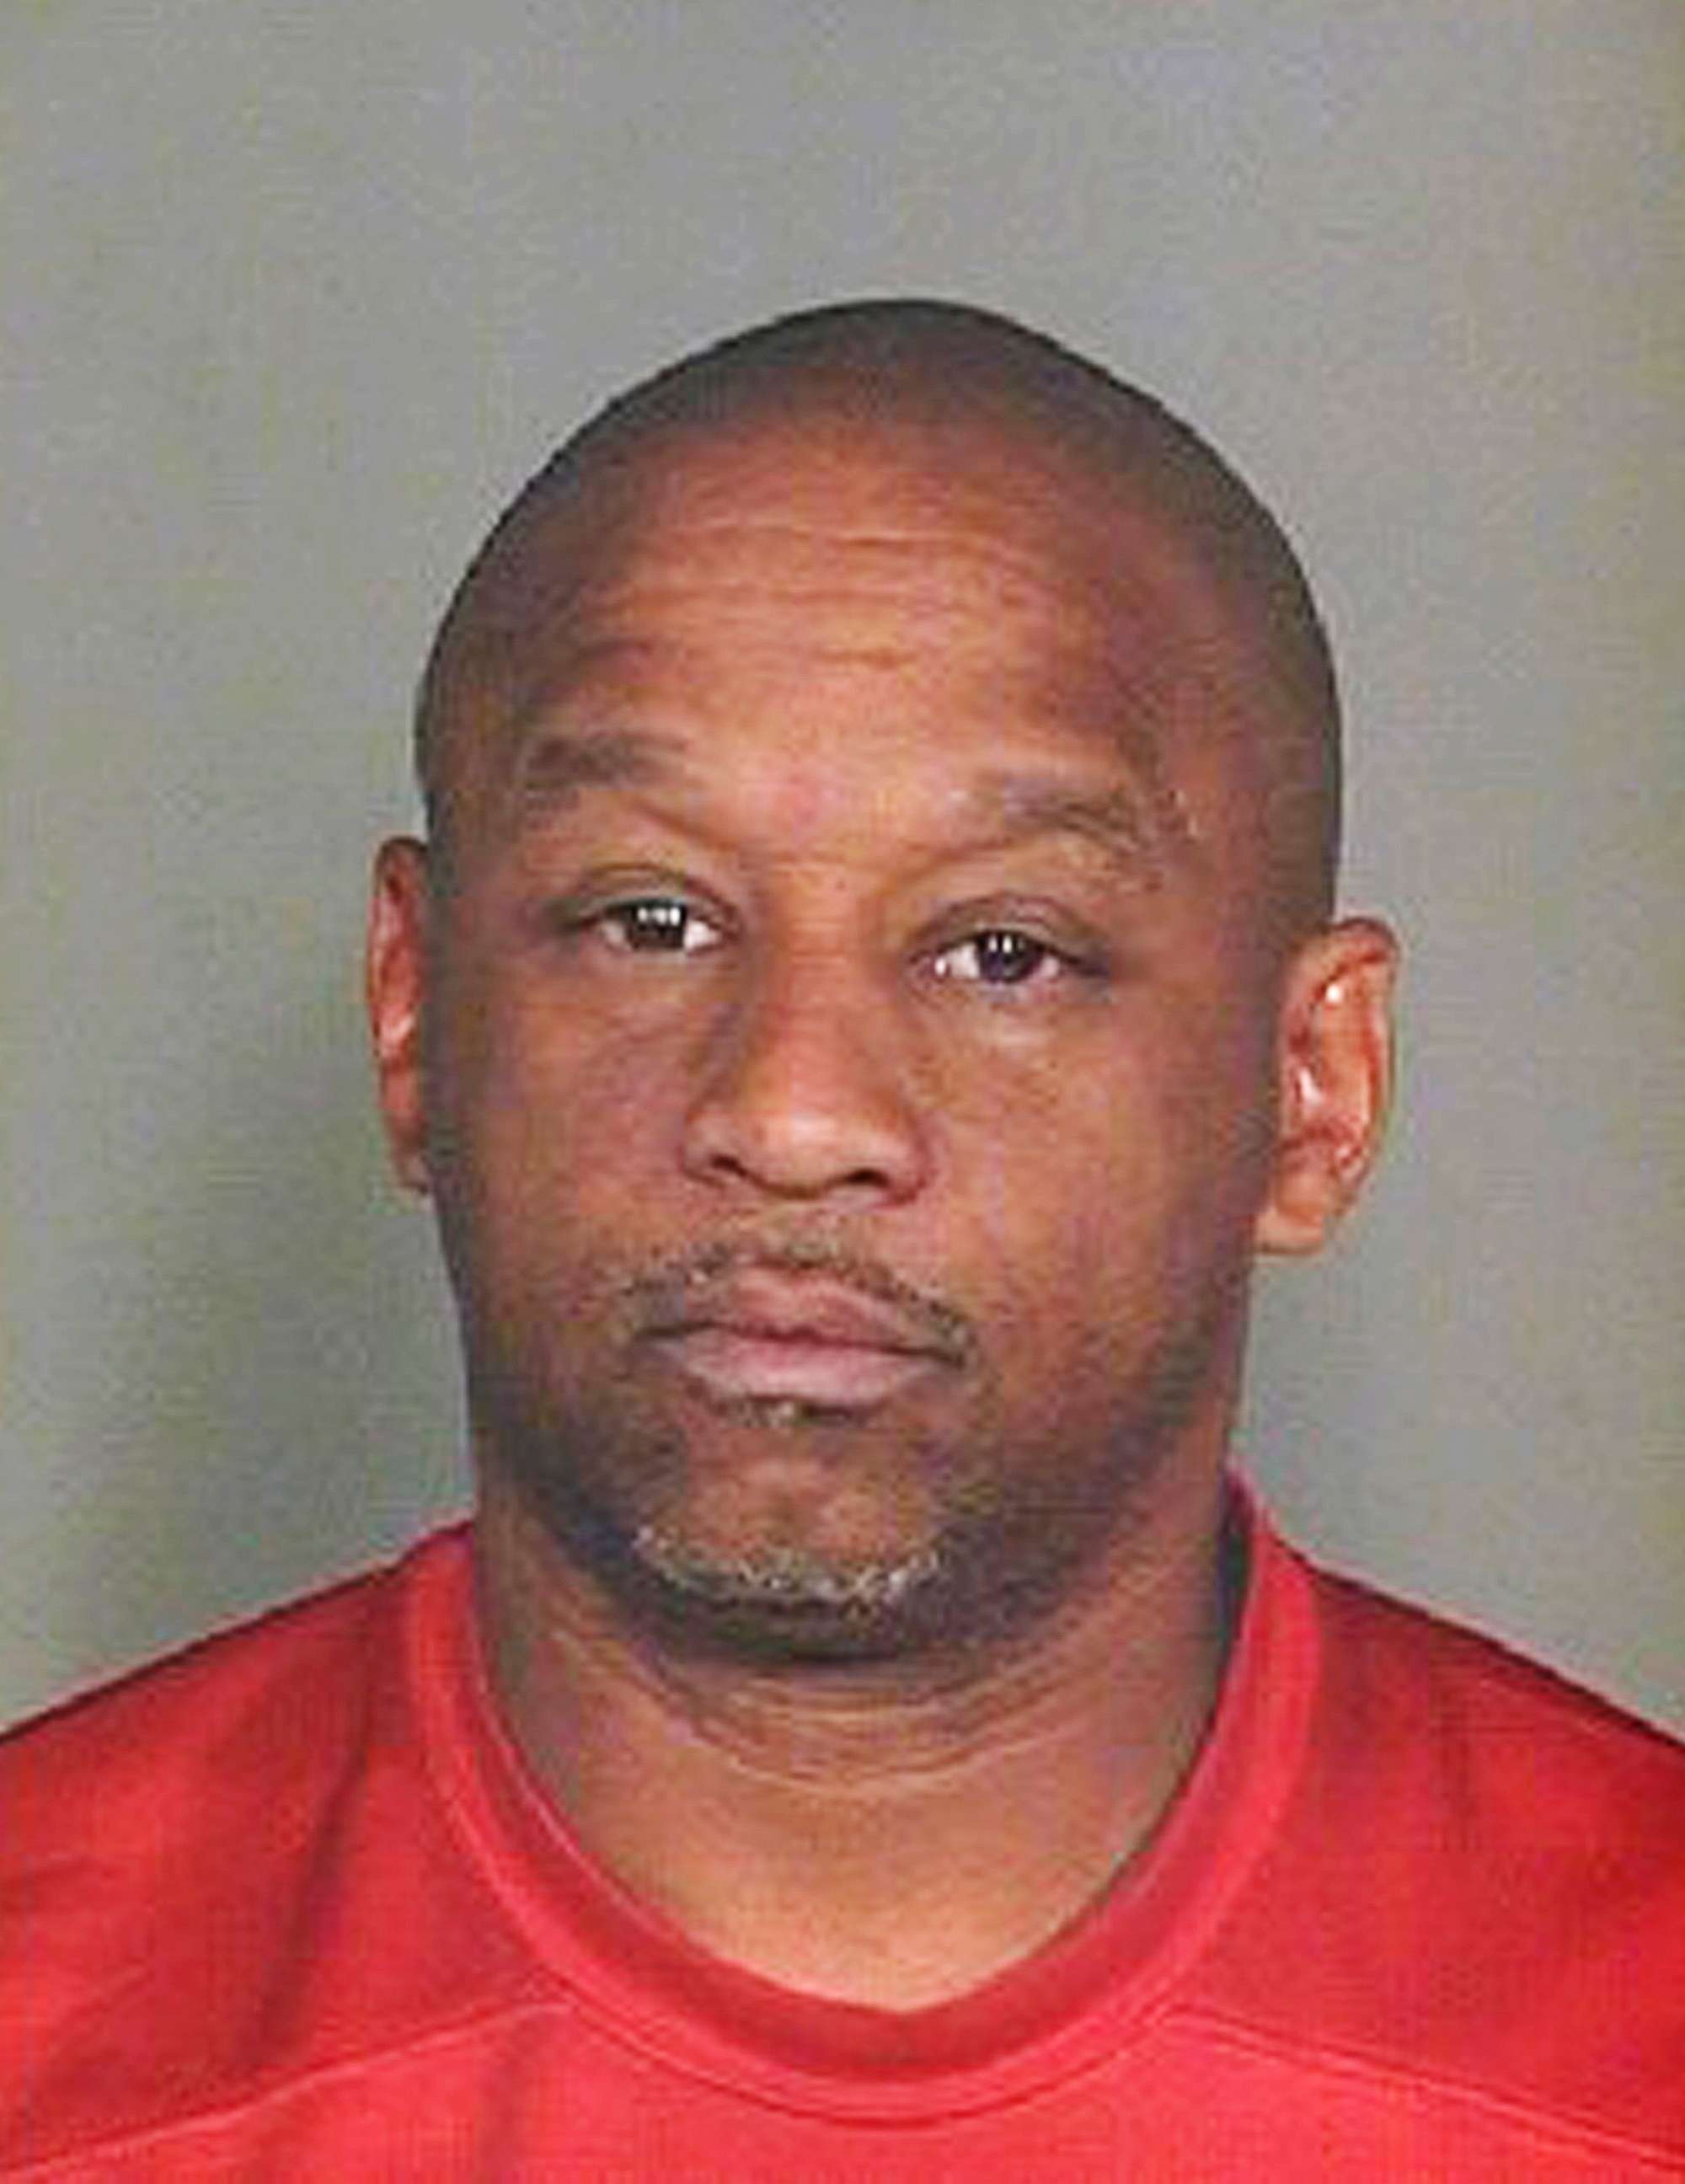 PHOTO: This undated photo release by the Scottsdale Police Department shows Dwight Lamon Jones.